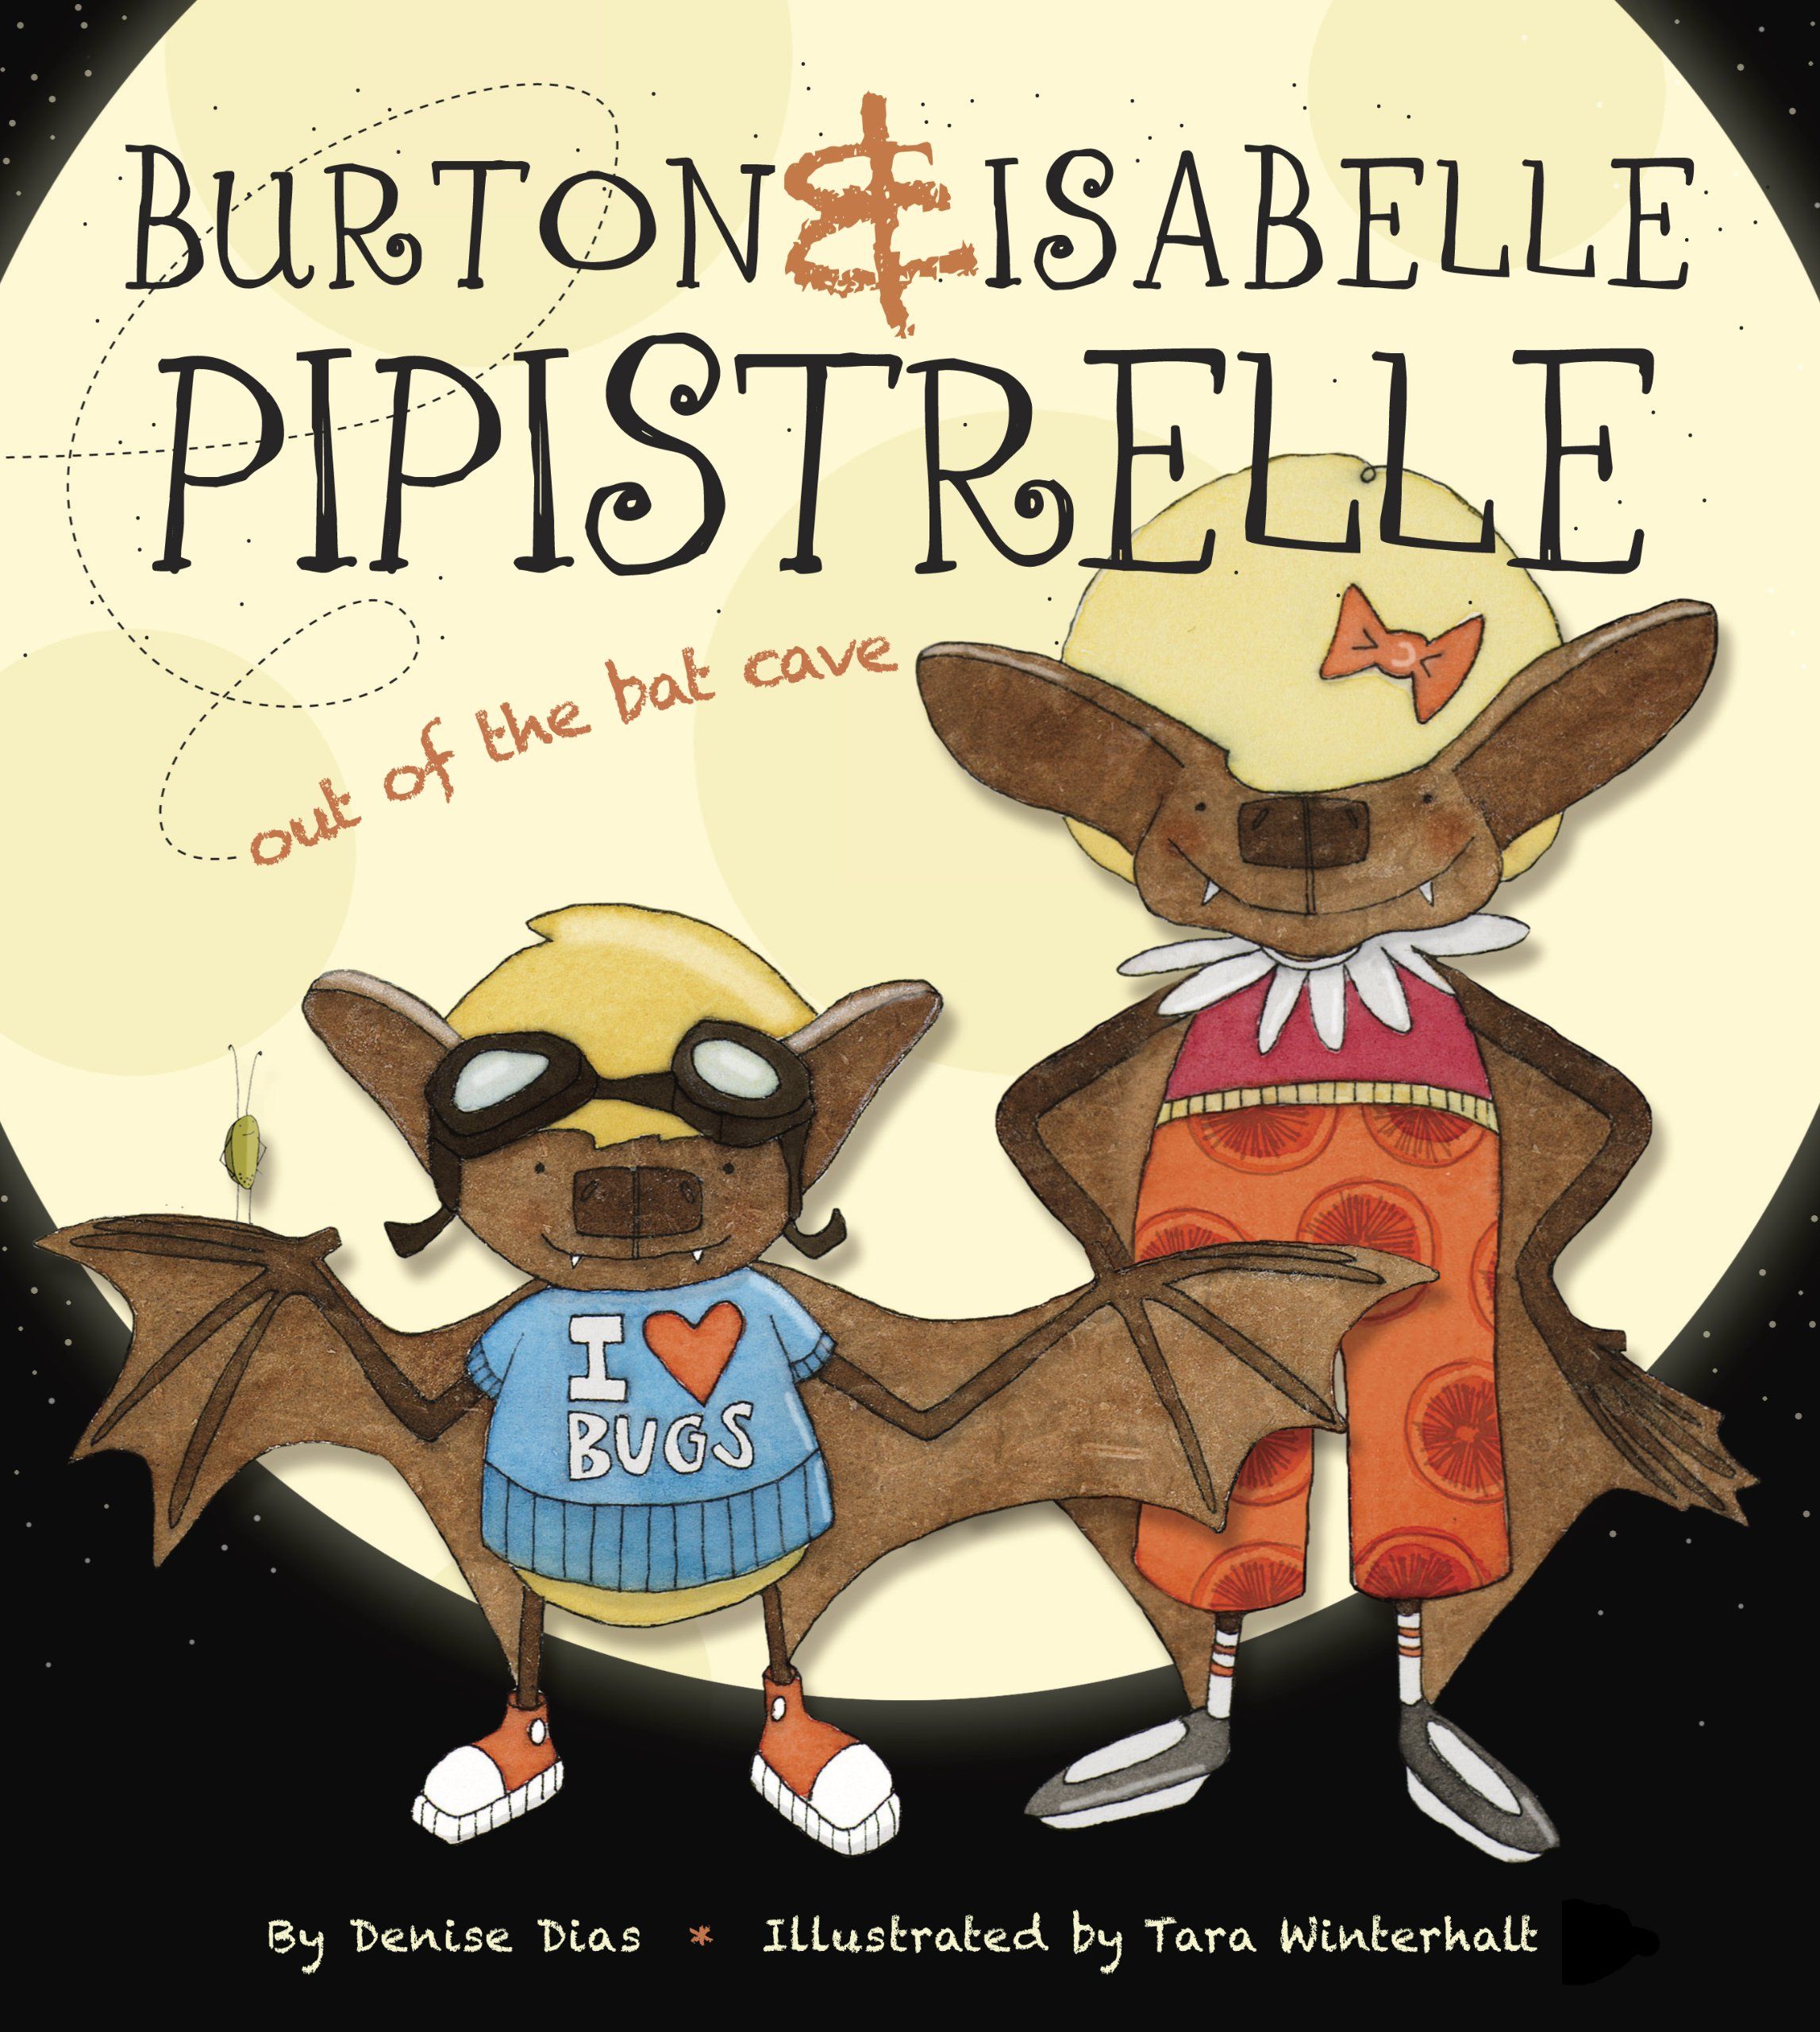 Two smiling cartoon bats pose in front of a full moon on the cover of “Burton and Isabelle Pipistrelle: Out of the Bat Cave”.